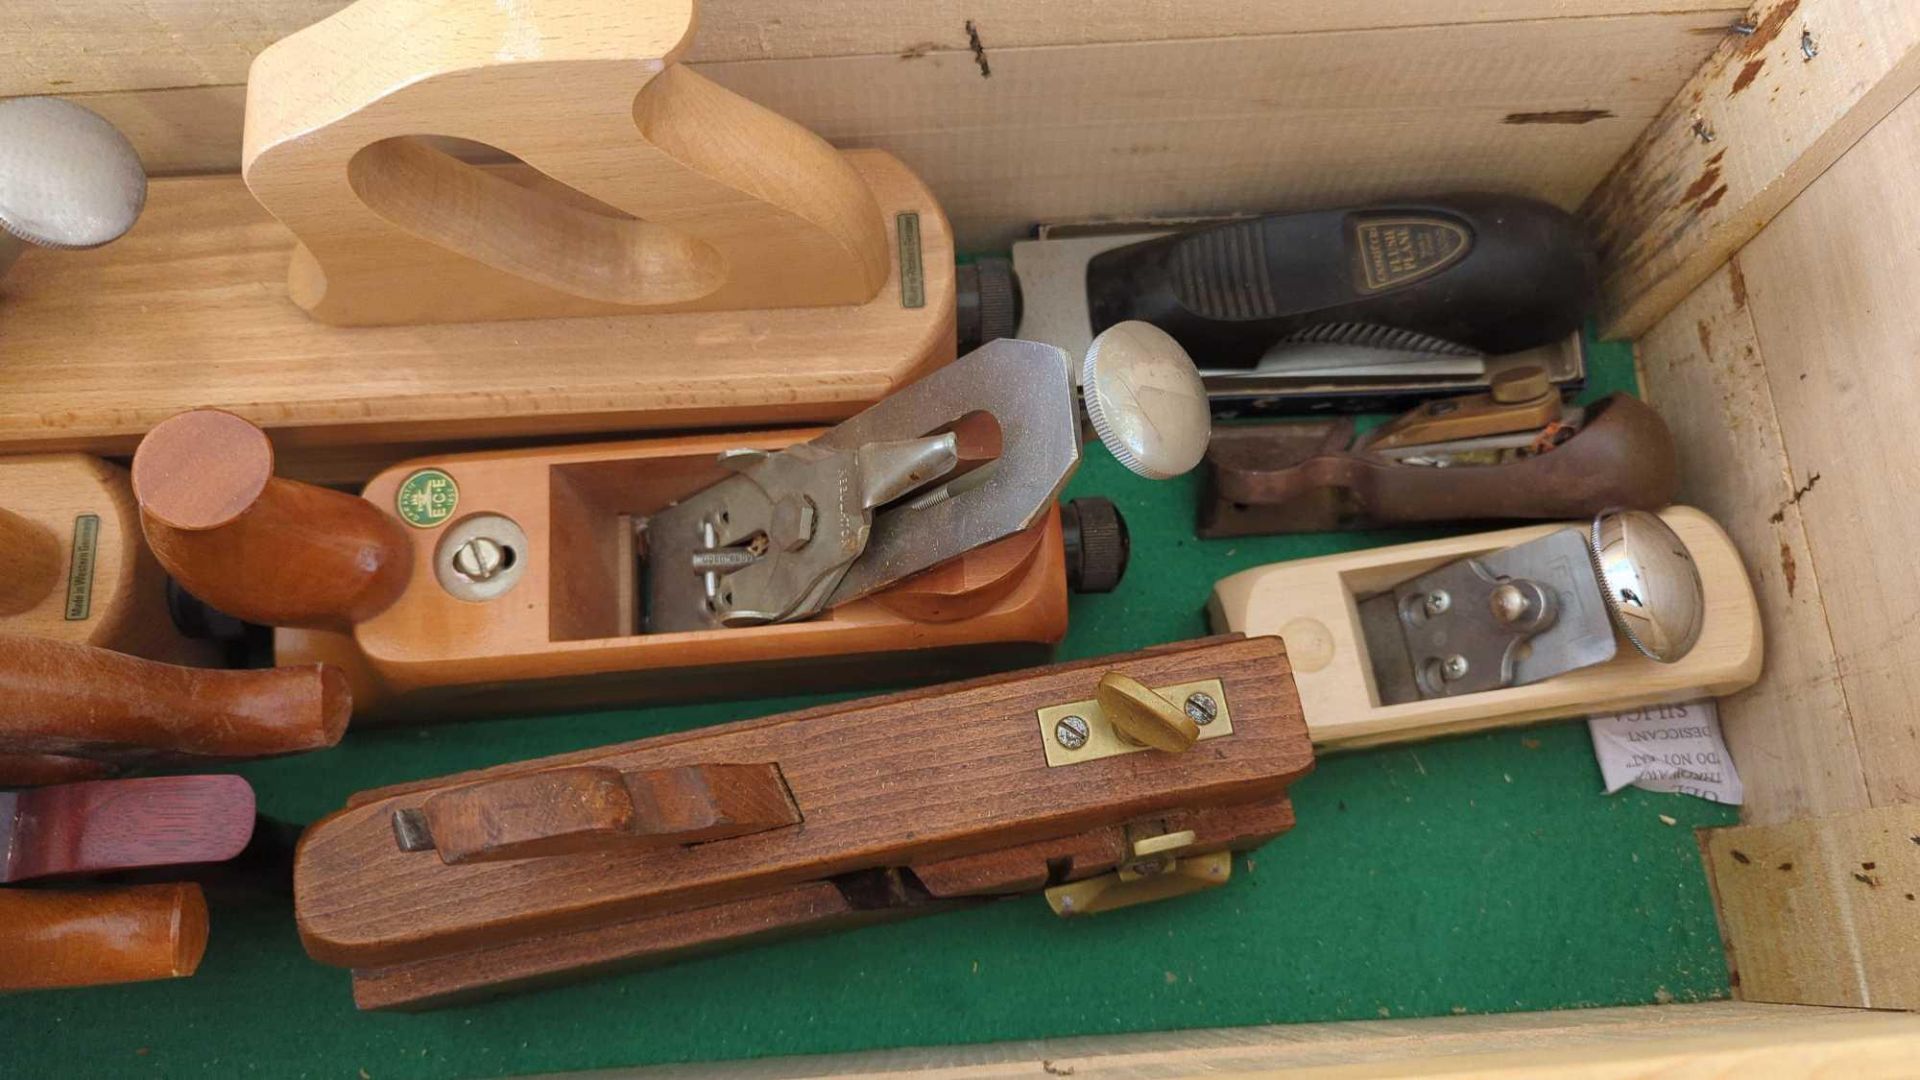 toolbox and woodworking tools - Image 9 of 9